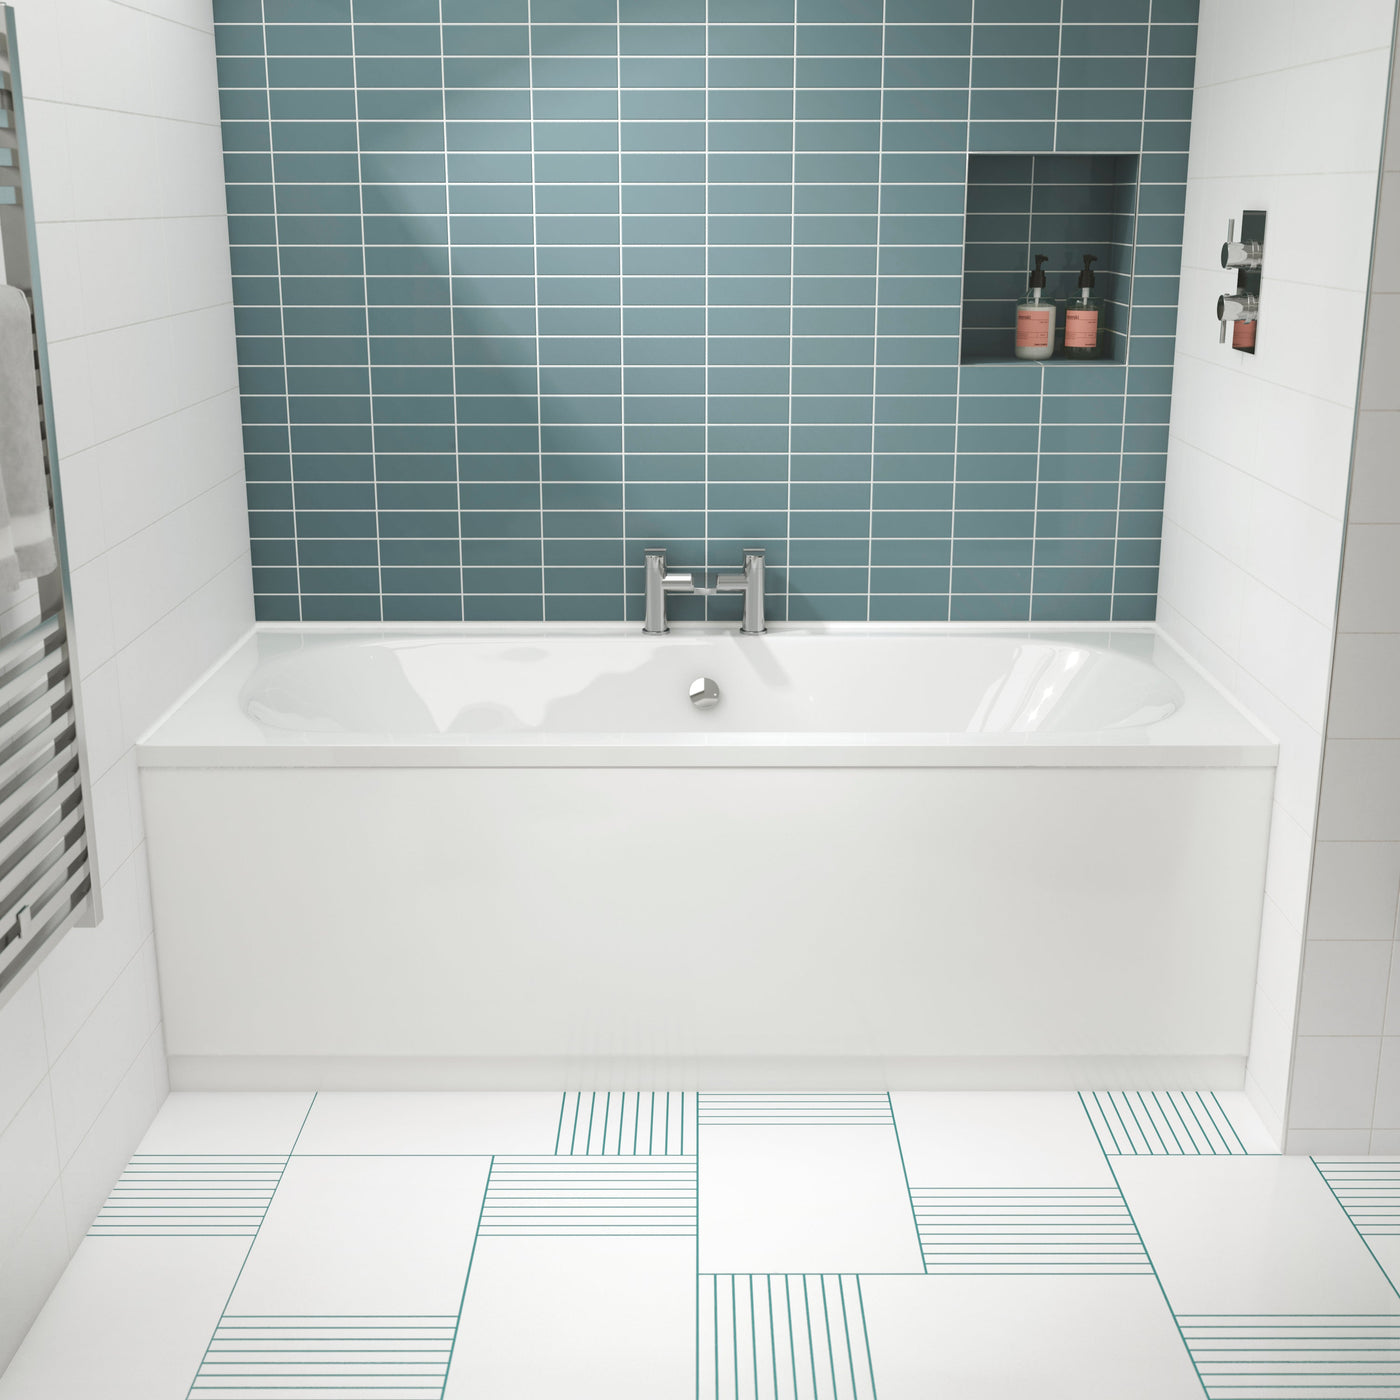 Round Bath - Double Ended Seating Design - Letta London - 